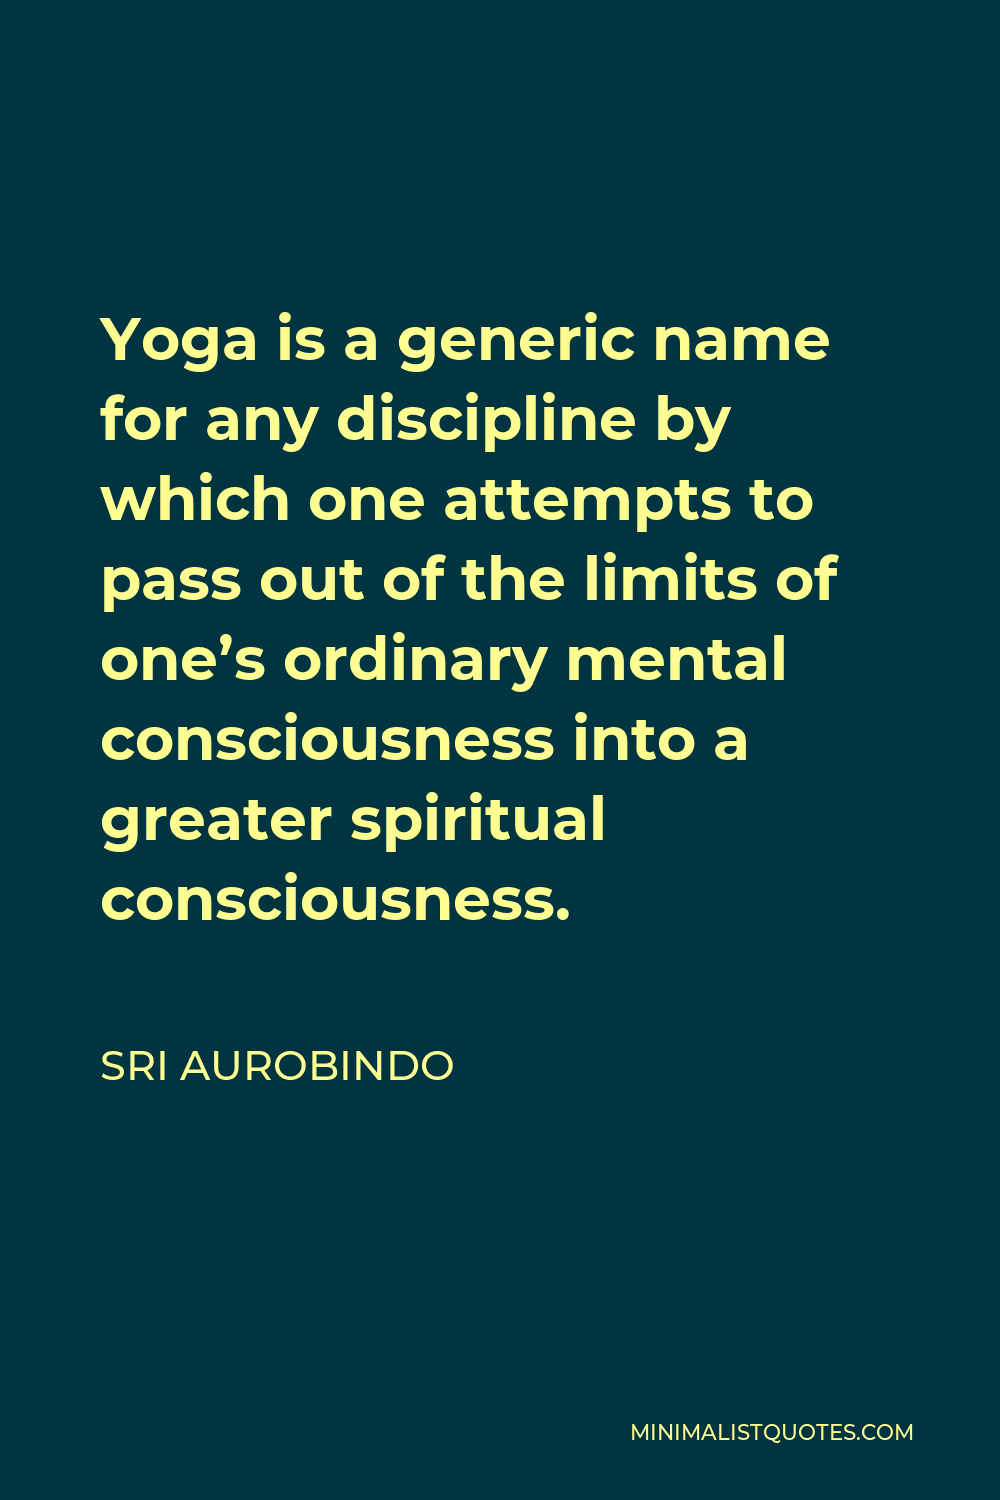 Sri Aurobindo Quote - Yoga is a generic name for any discipline by which one attempts to pass out of the limits of one’s ordinary mental consciousness into a greater spiritual consciousness.